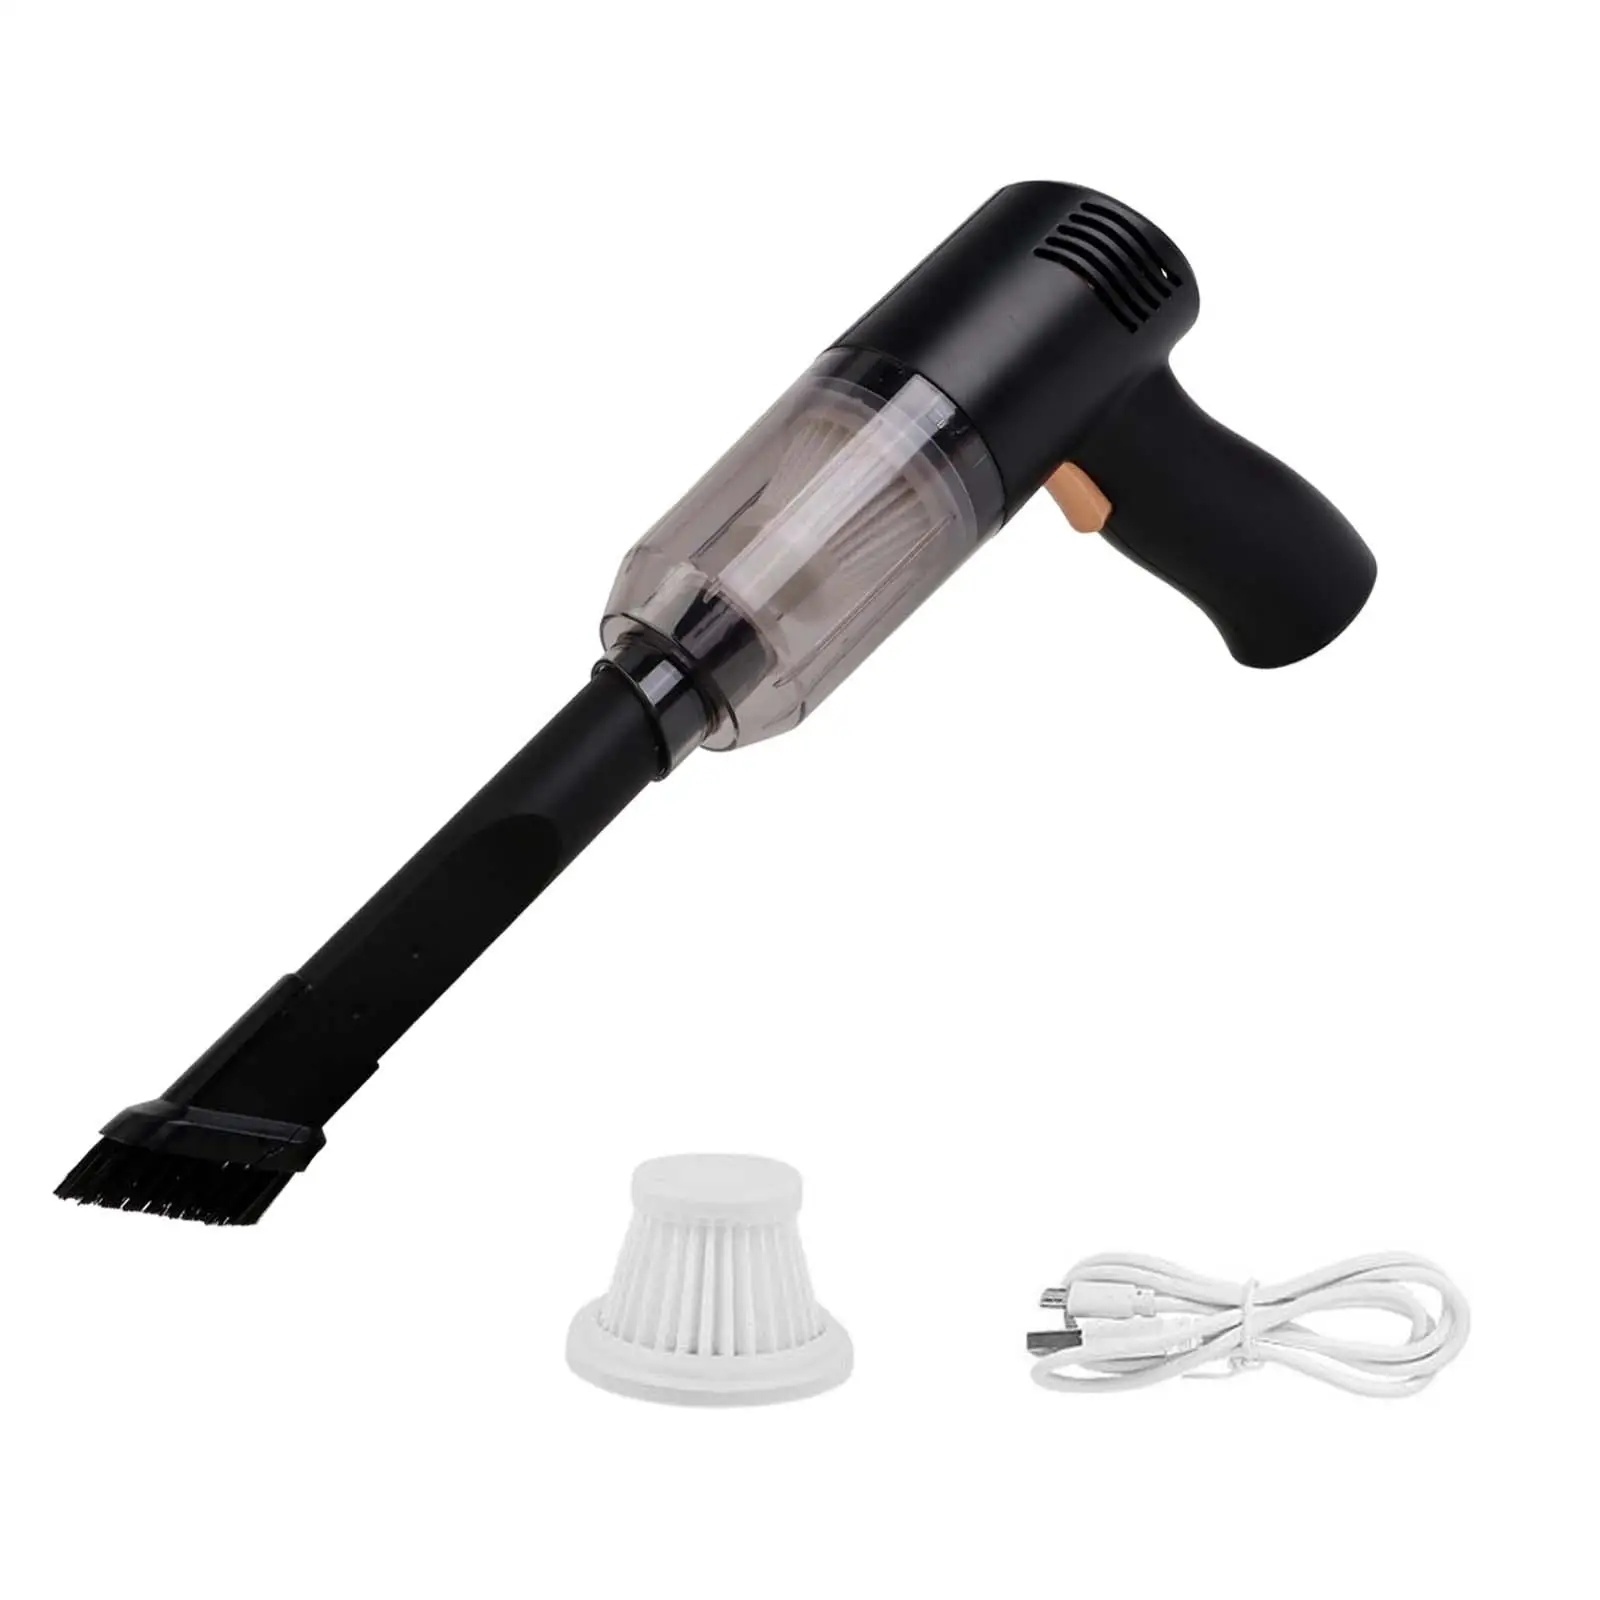 Car Vacuum Easy to Use High Power Portable Hand Vacuum Cleaner USB Rechargeable Mini Vacuum Cleaner for Office Pet Hair Keyboard